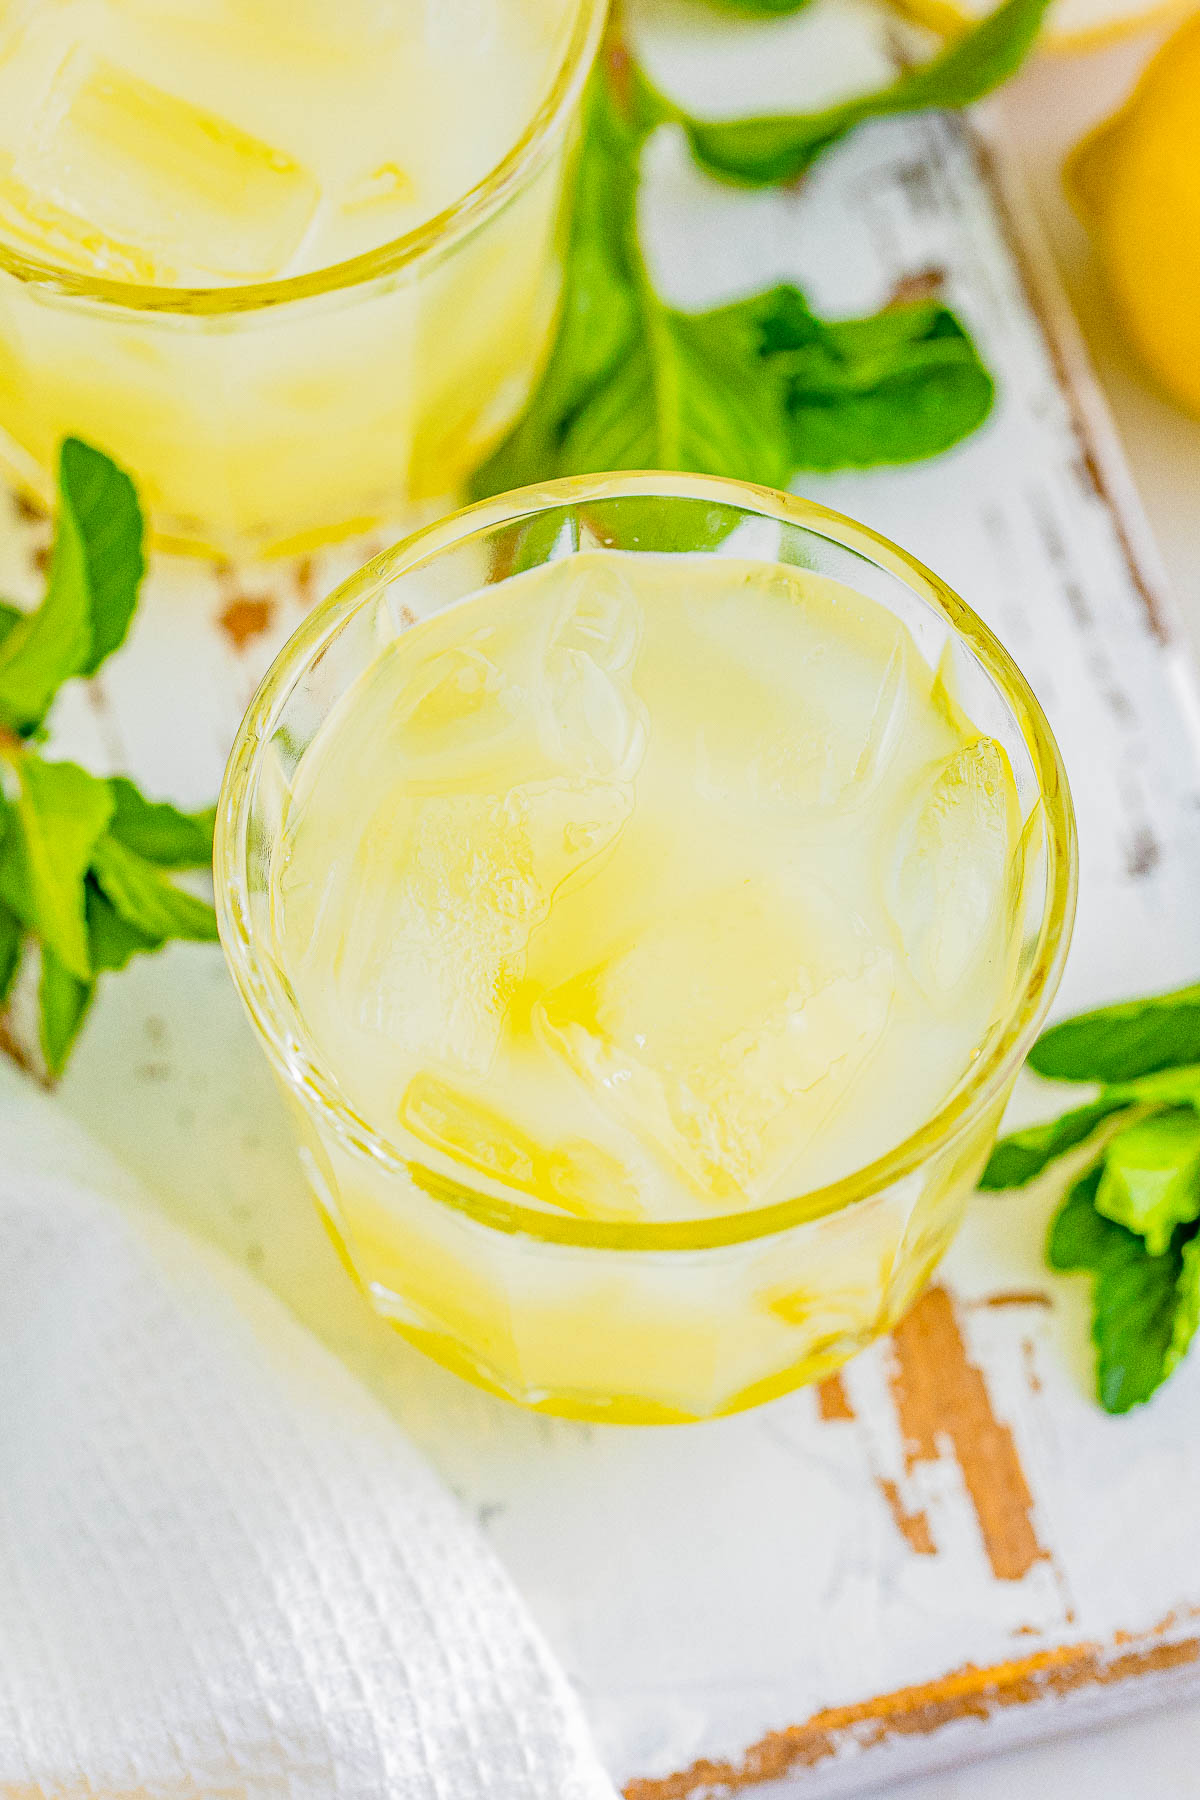 A glass of limoncello spritz garnished with fresh mint leaves.